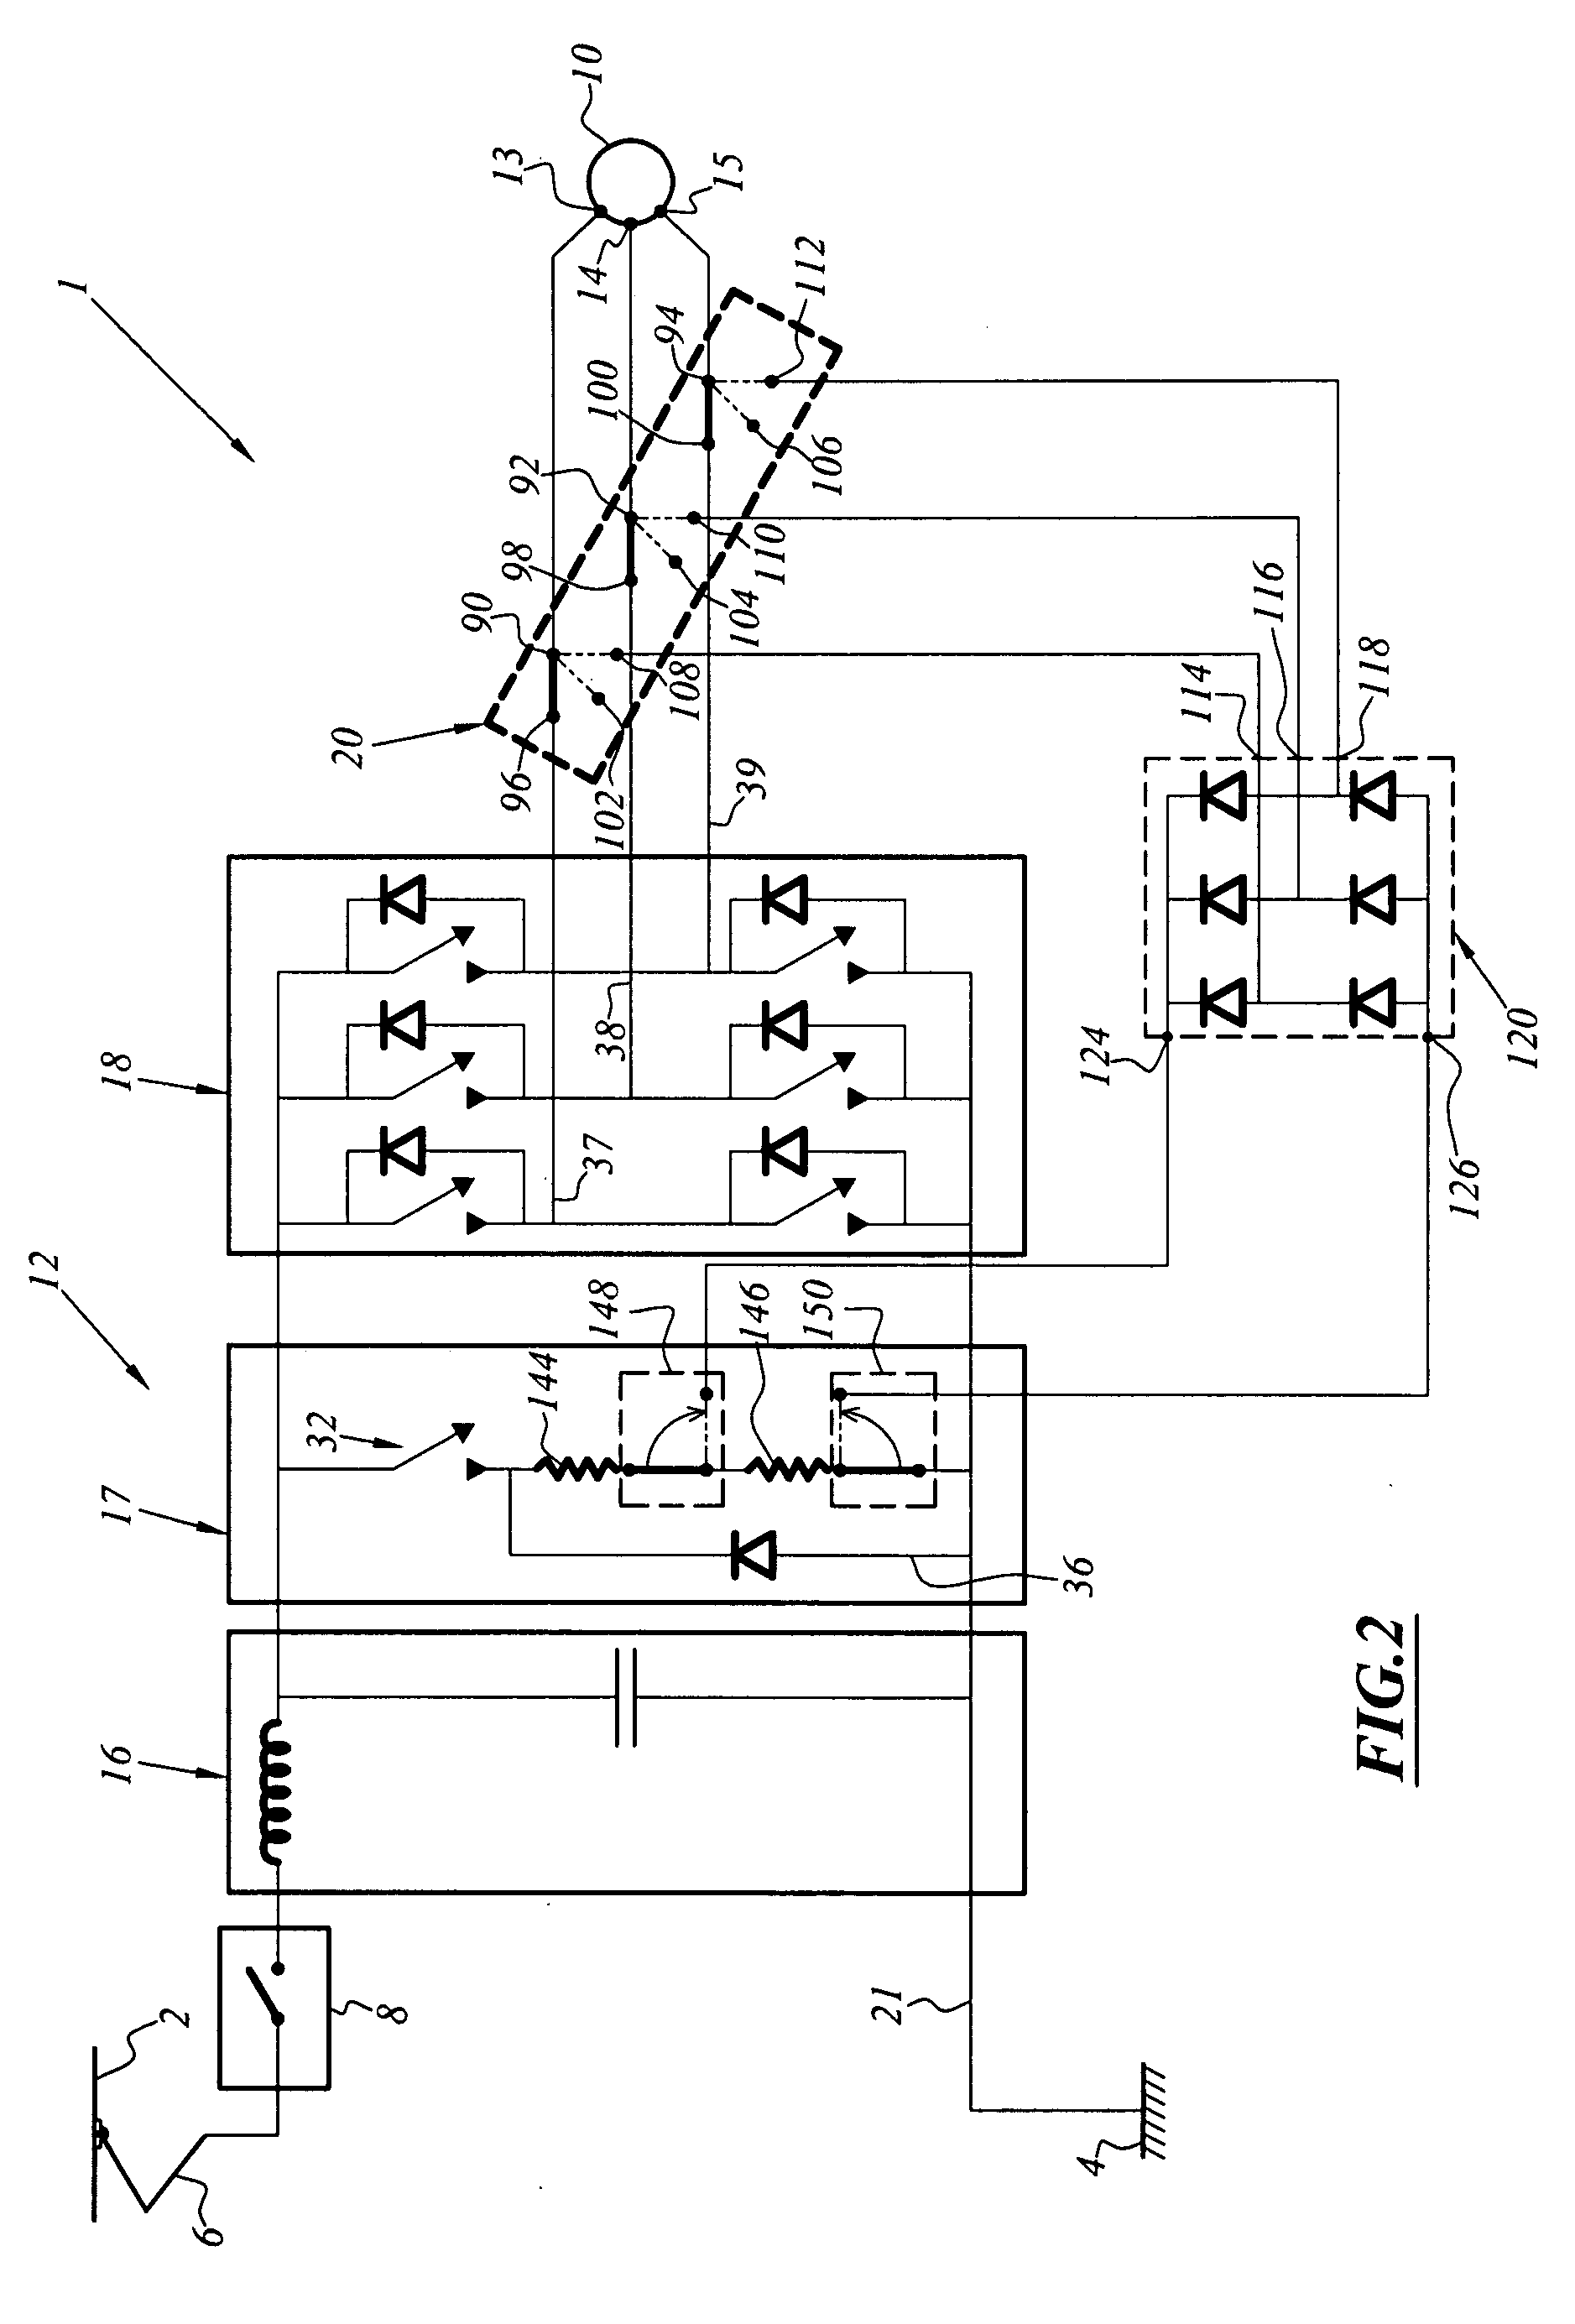 Rheostatic safety braking device having a bipolar resistive assembly with permanent magnet motor